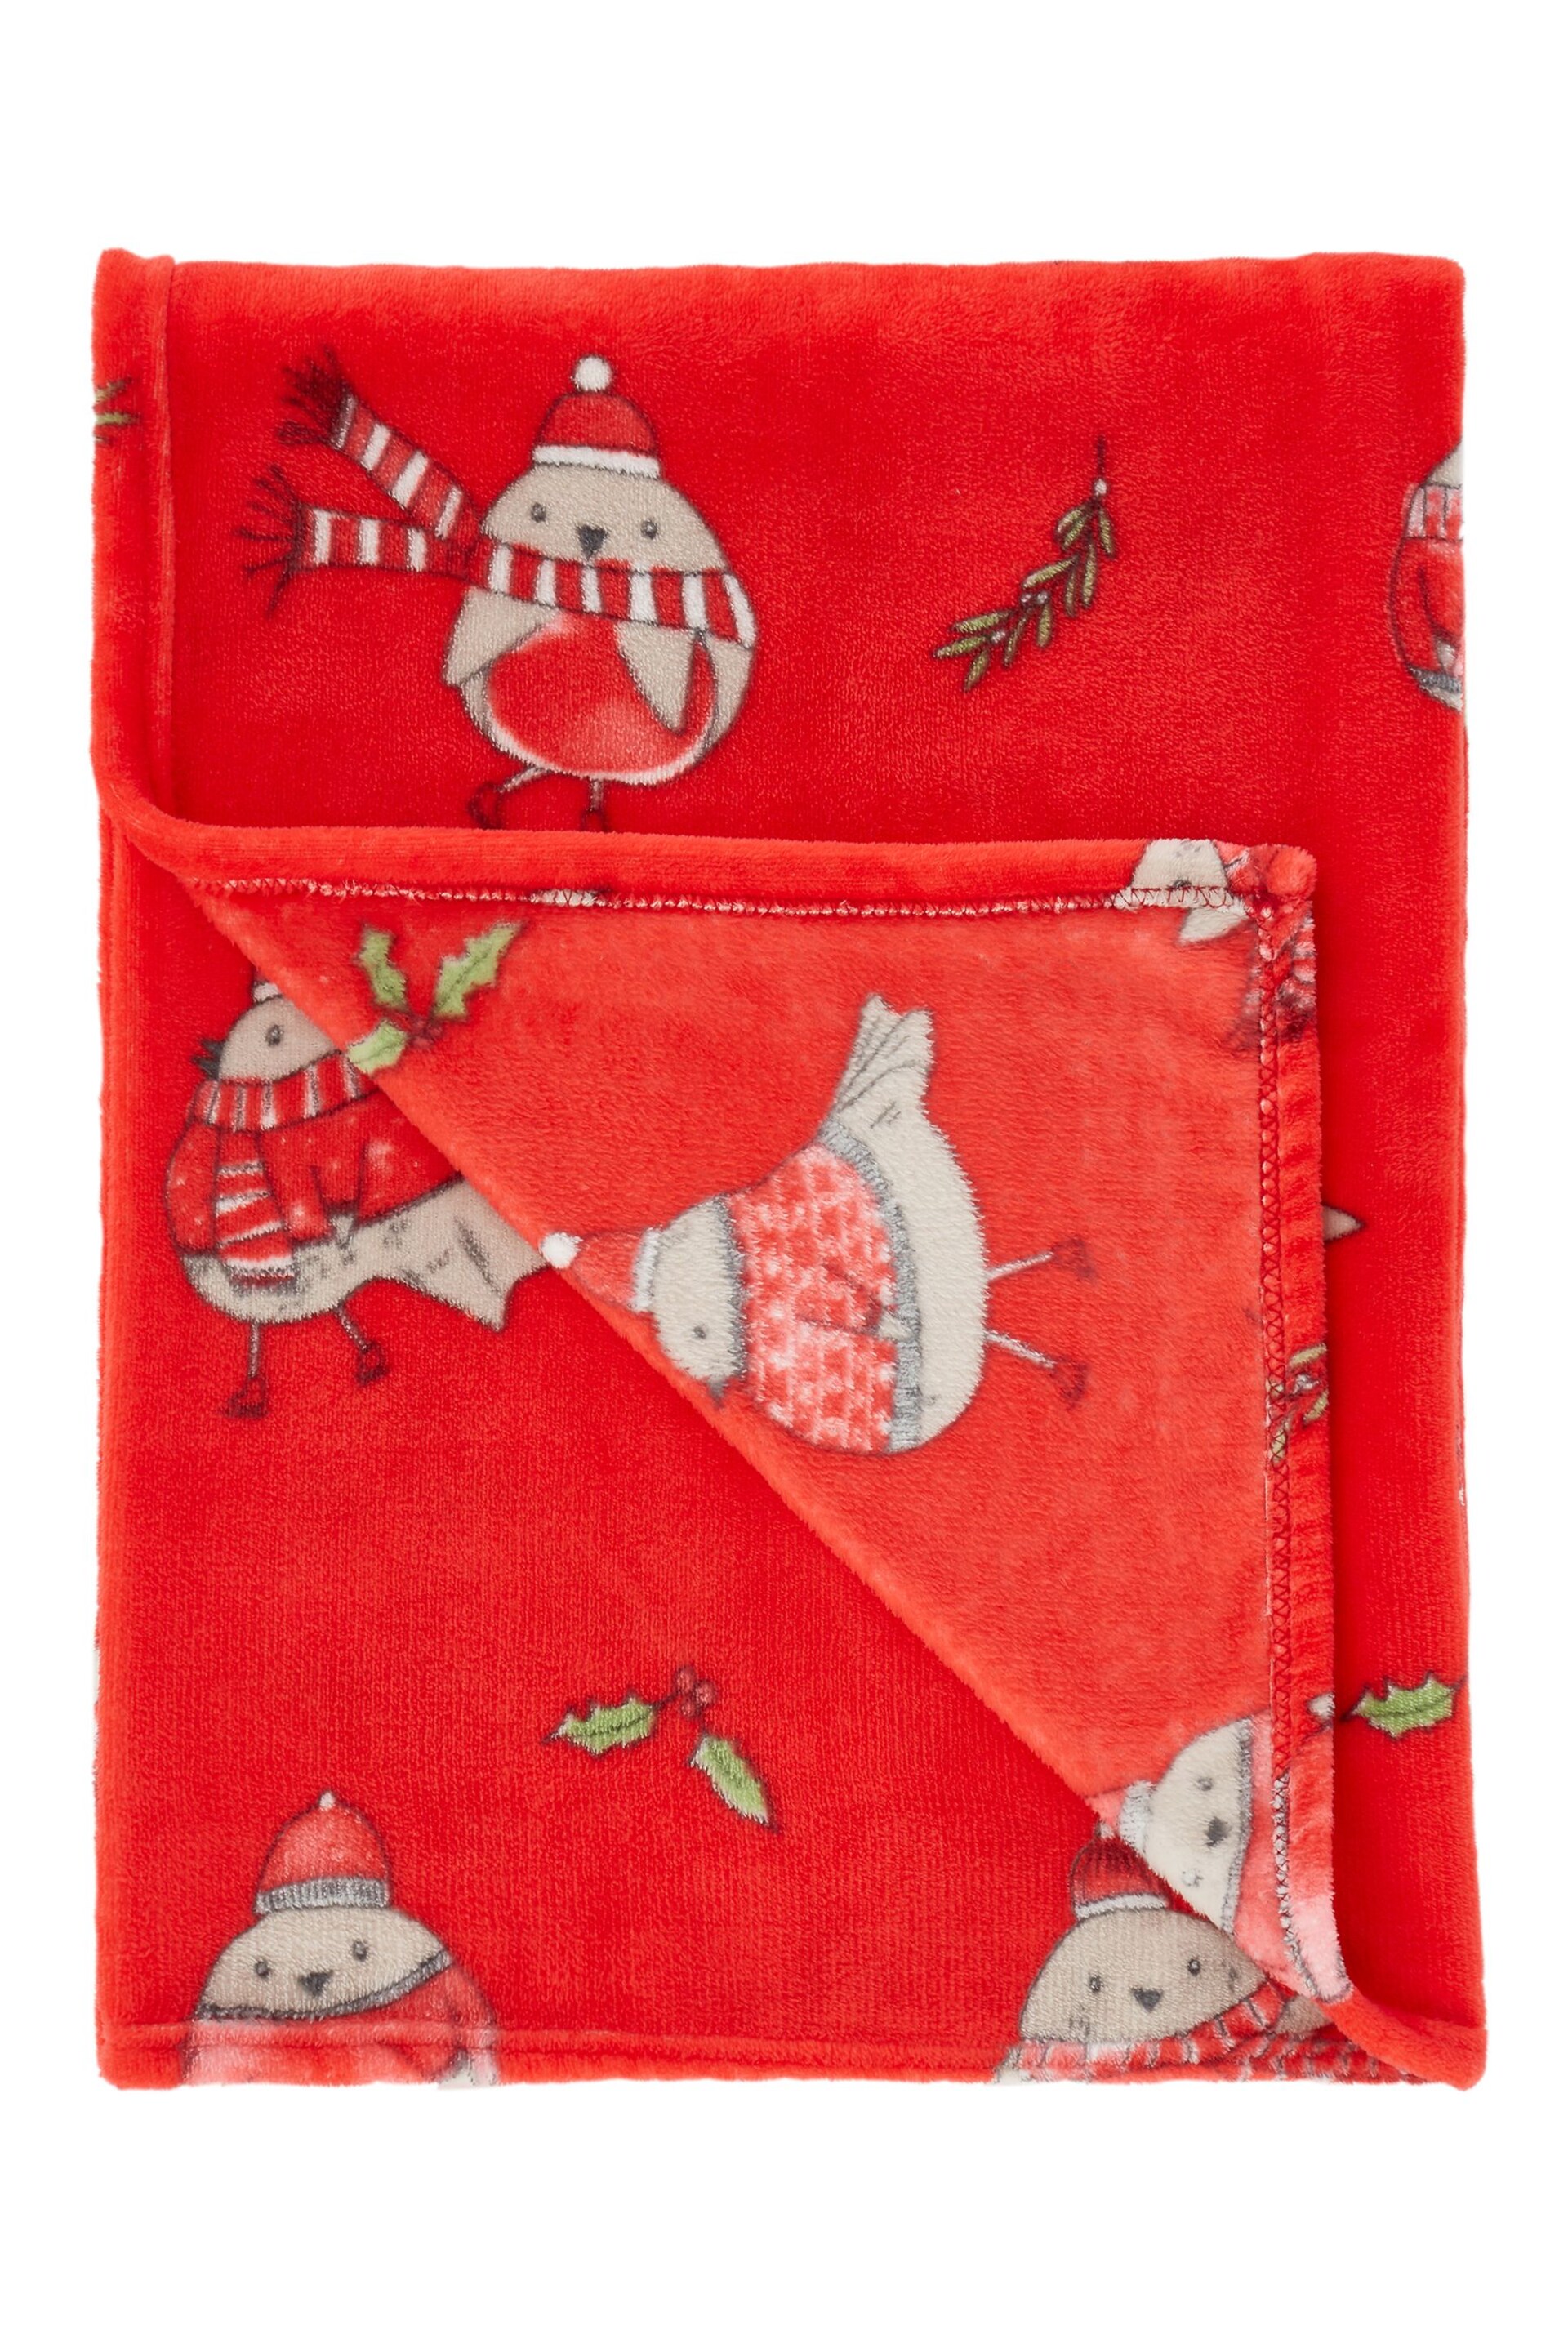 Catherine Lansfield Red Teddy Christmas Robins Warm And Cosy Fleece Throw - Image 4 of 4